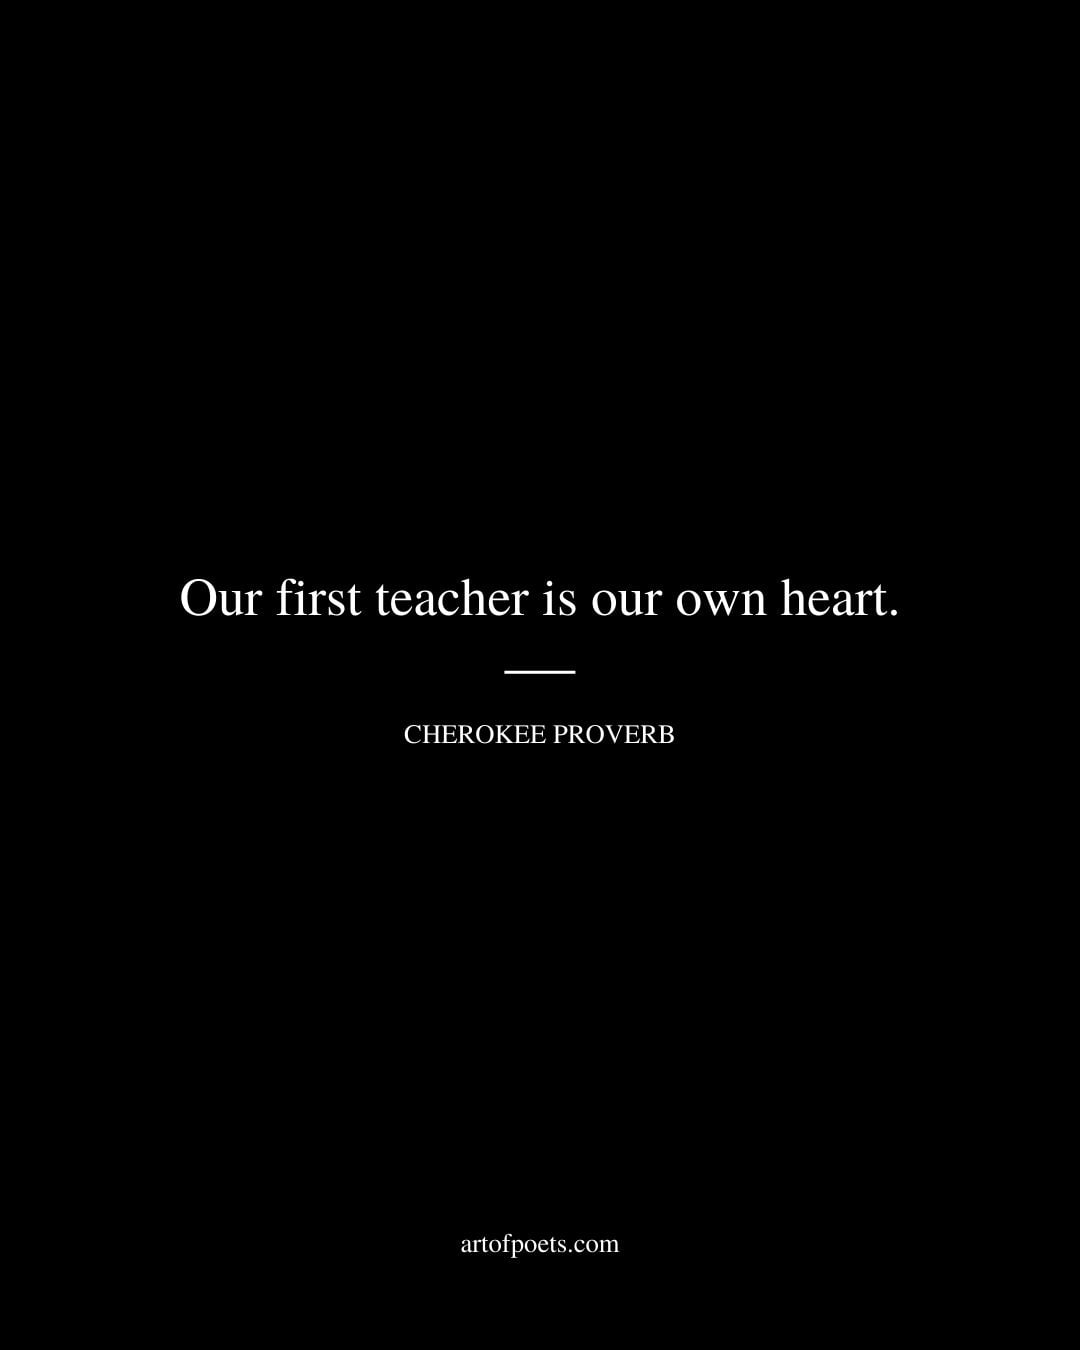 Our first teacher is our own heart